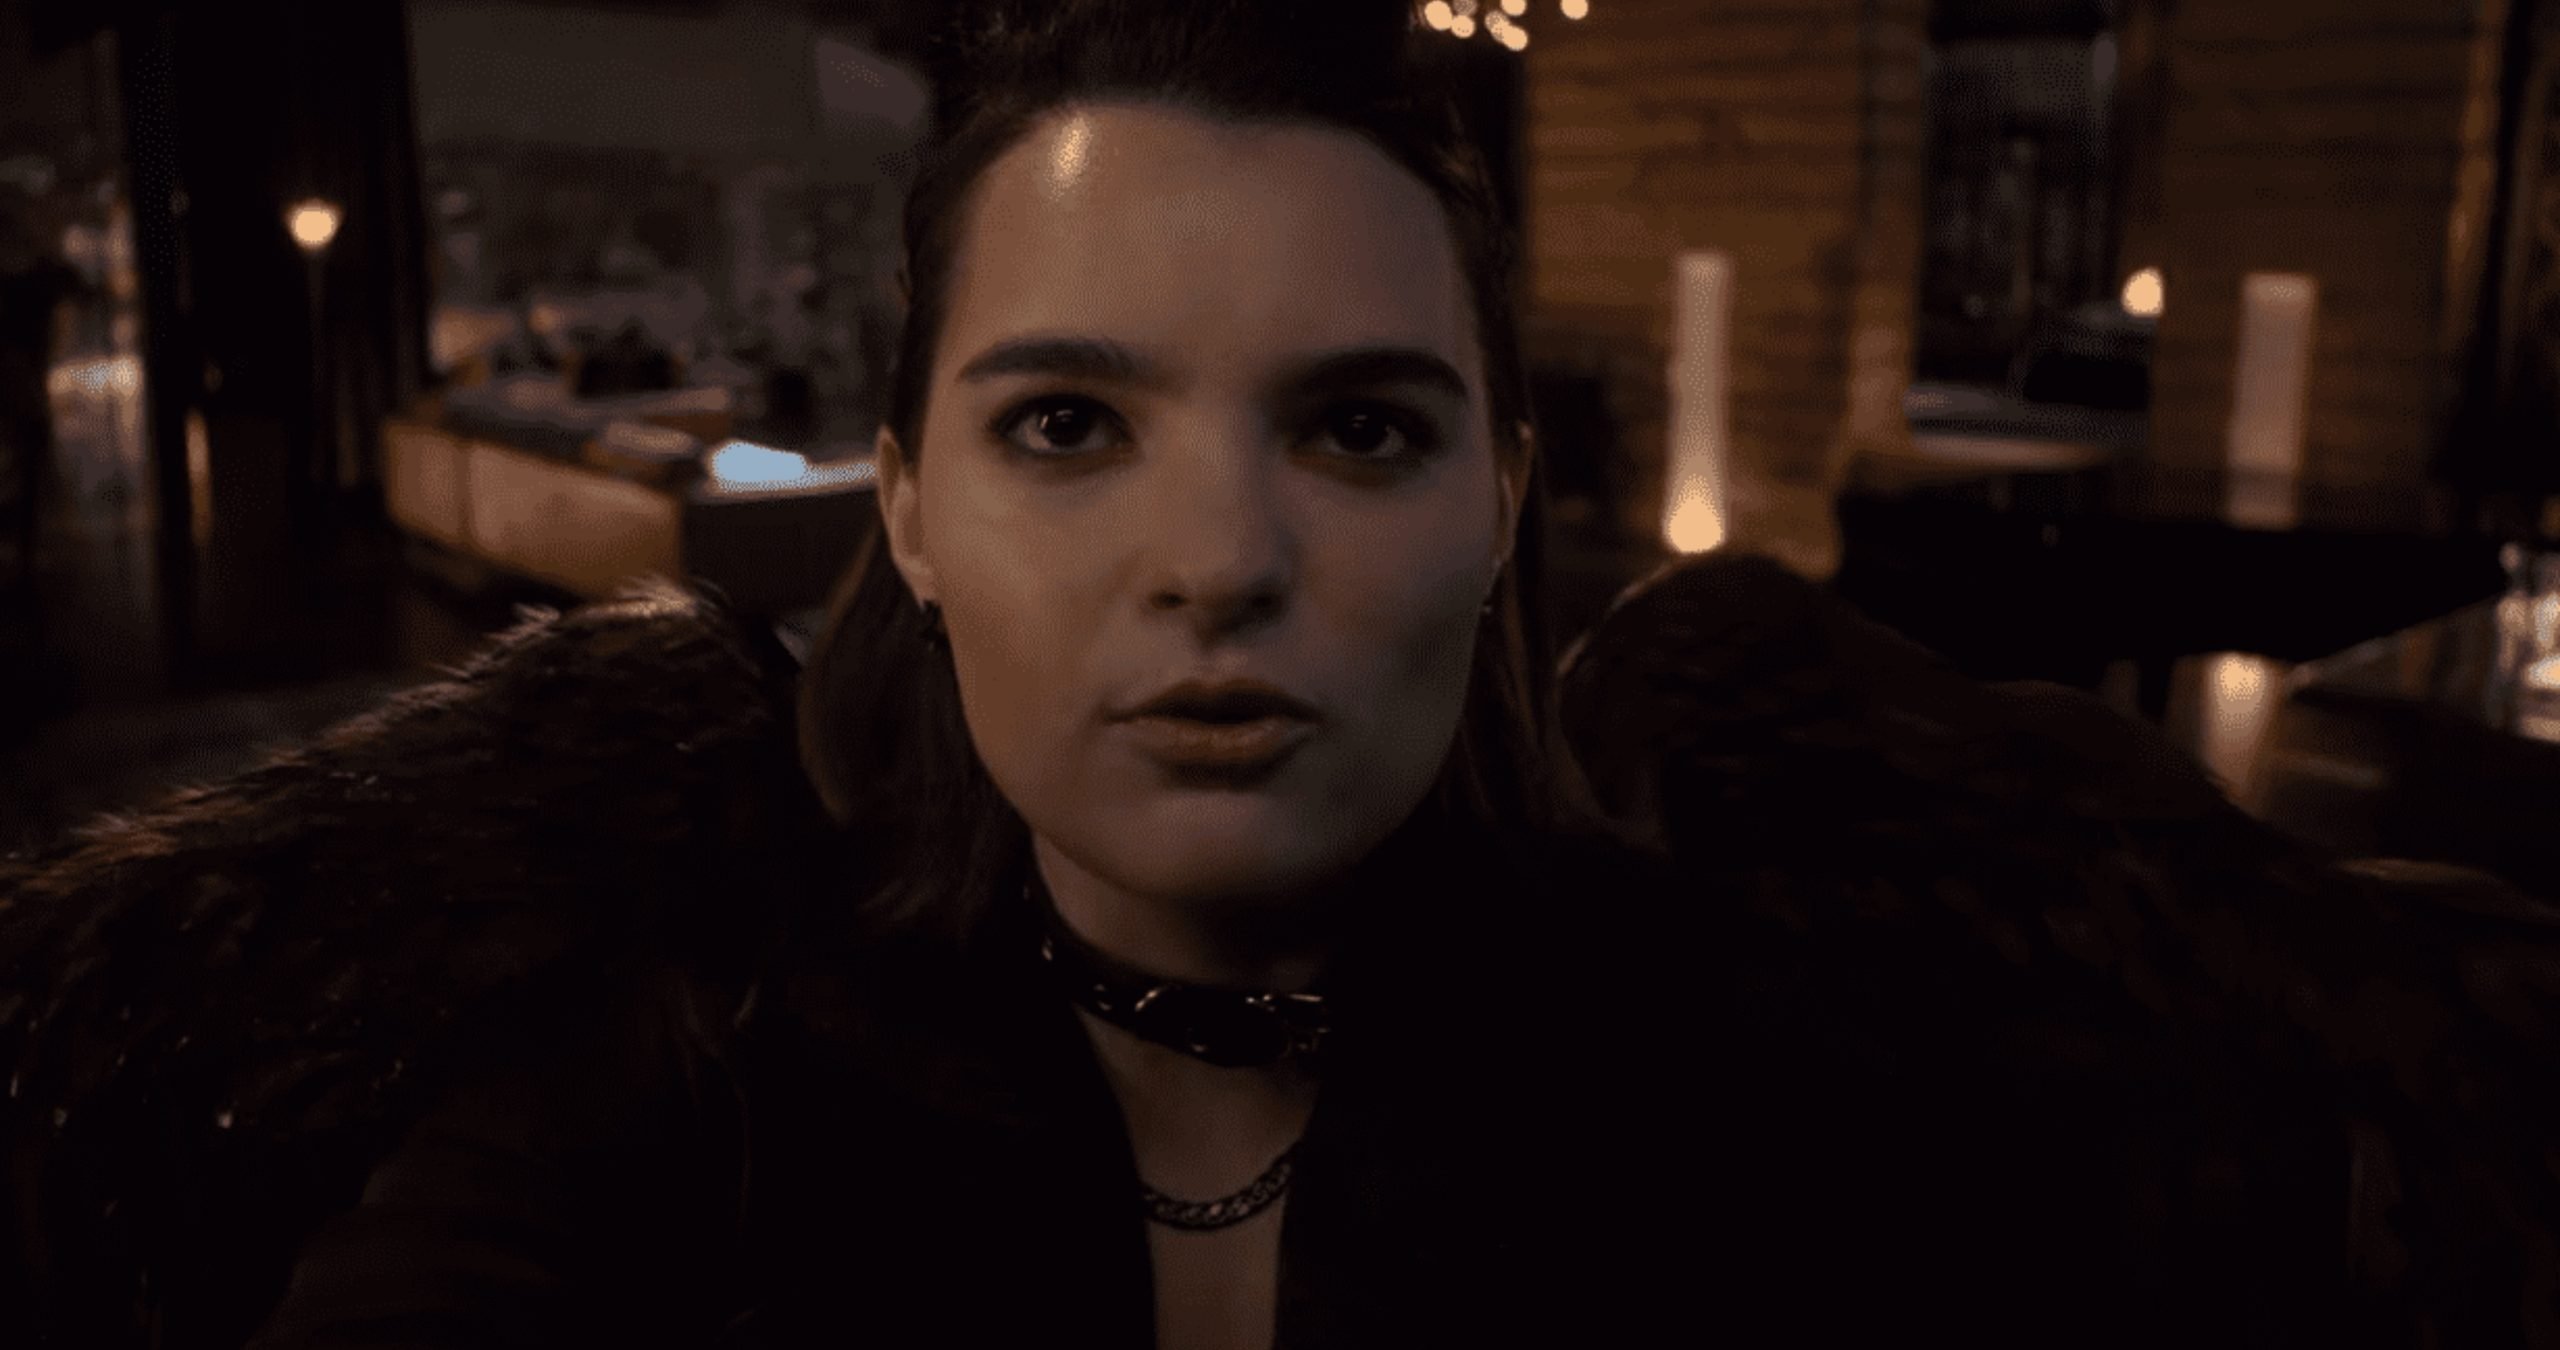 Brianna Hildebrand as Rory 'Lucifer' with slicked back hair